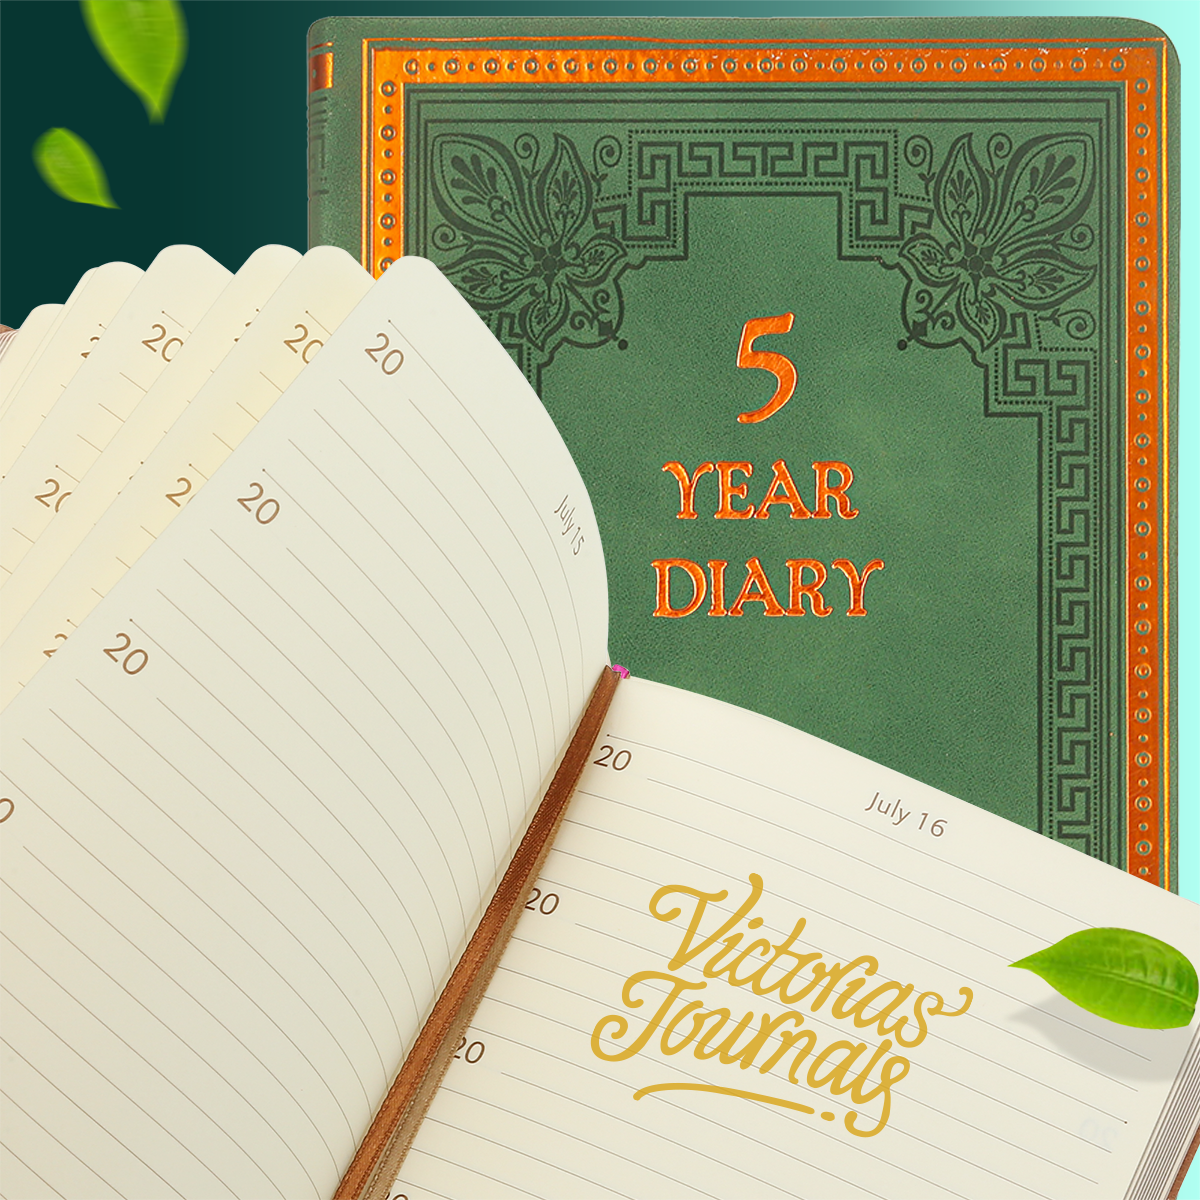 Five-Year Vintage Look Diary (Motivational, Prayer, Gratitude, Mindfulness, Self-Help and Daily Affirmations) 4.64x6.6", 394p. (Green)